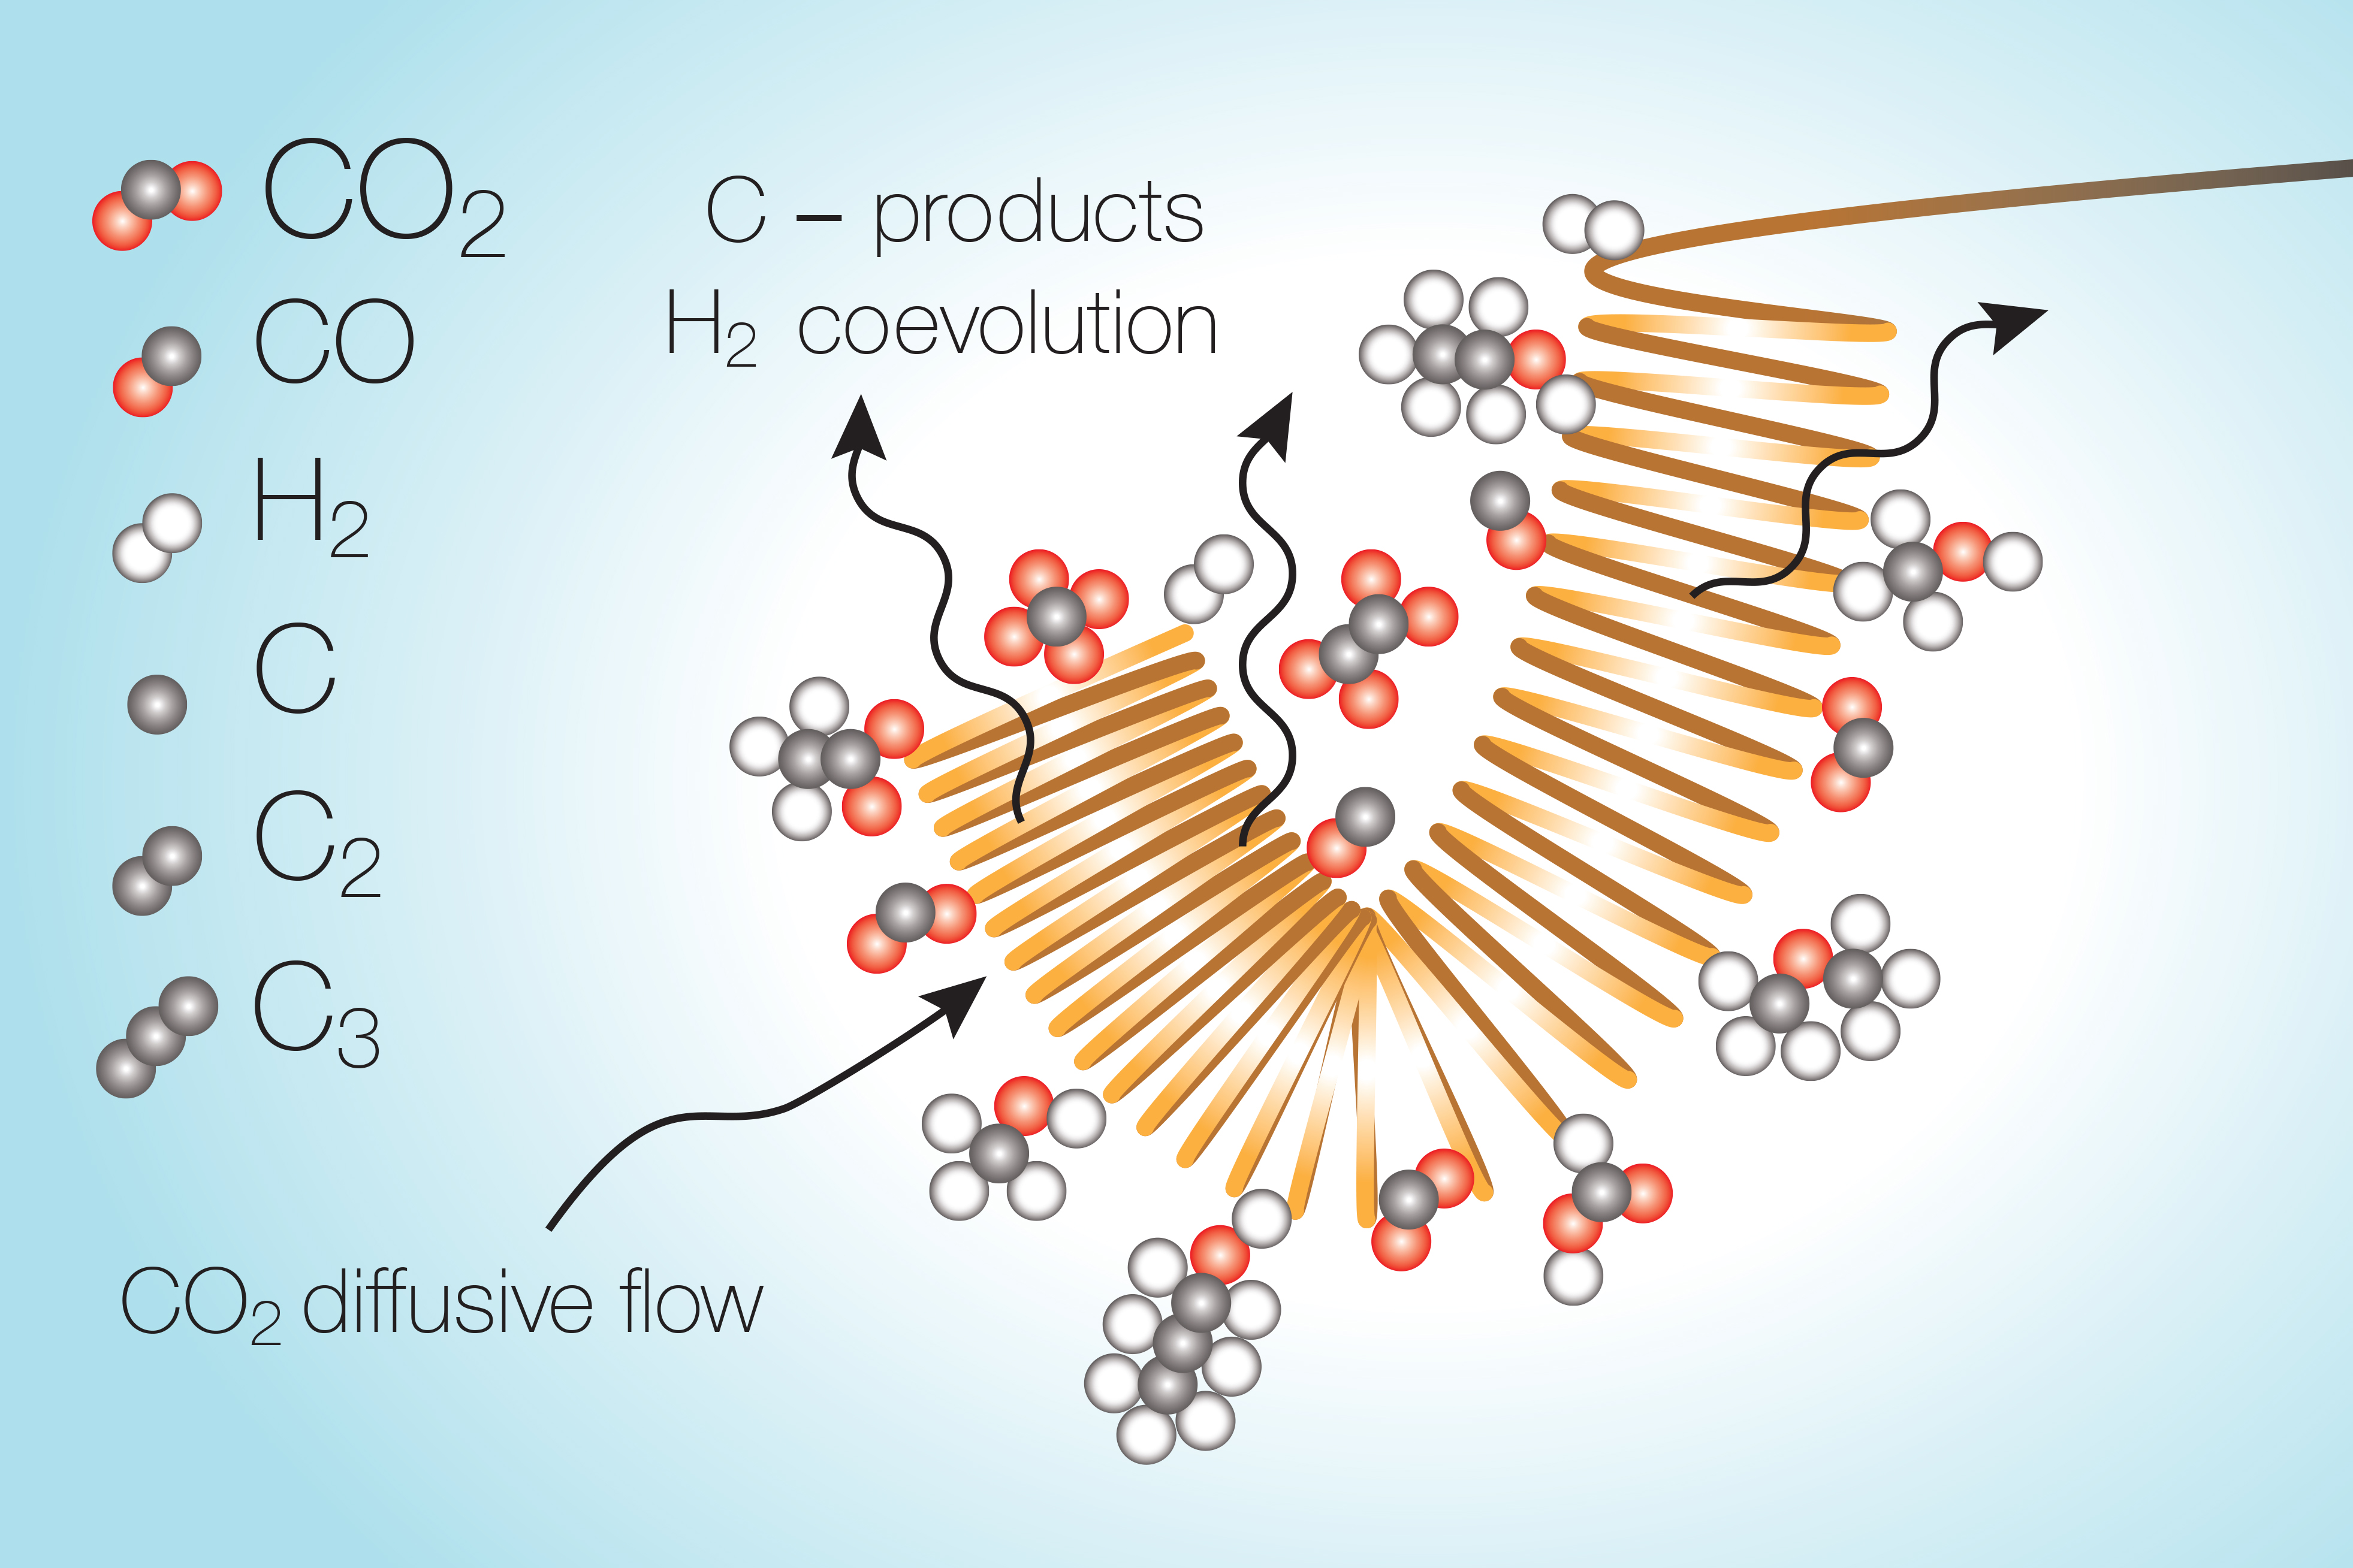 Overcoming a bottleneck in carbon dioxide conversion, MIT News